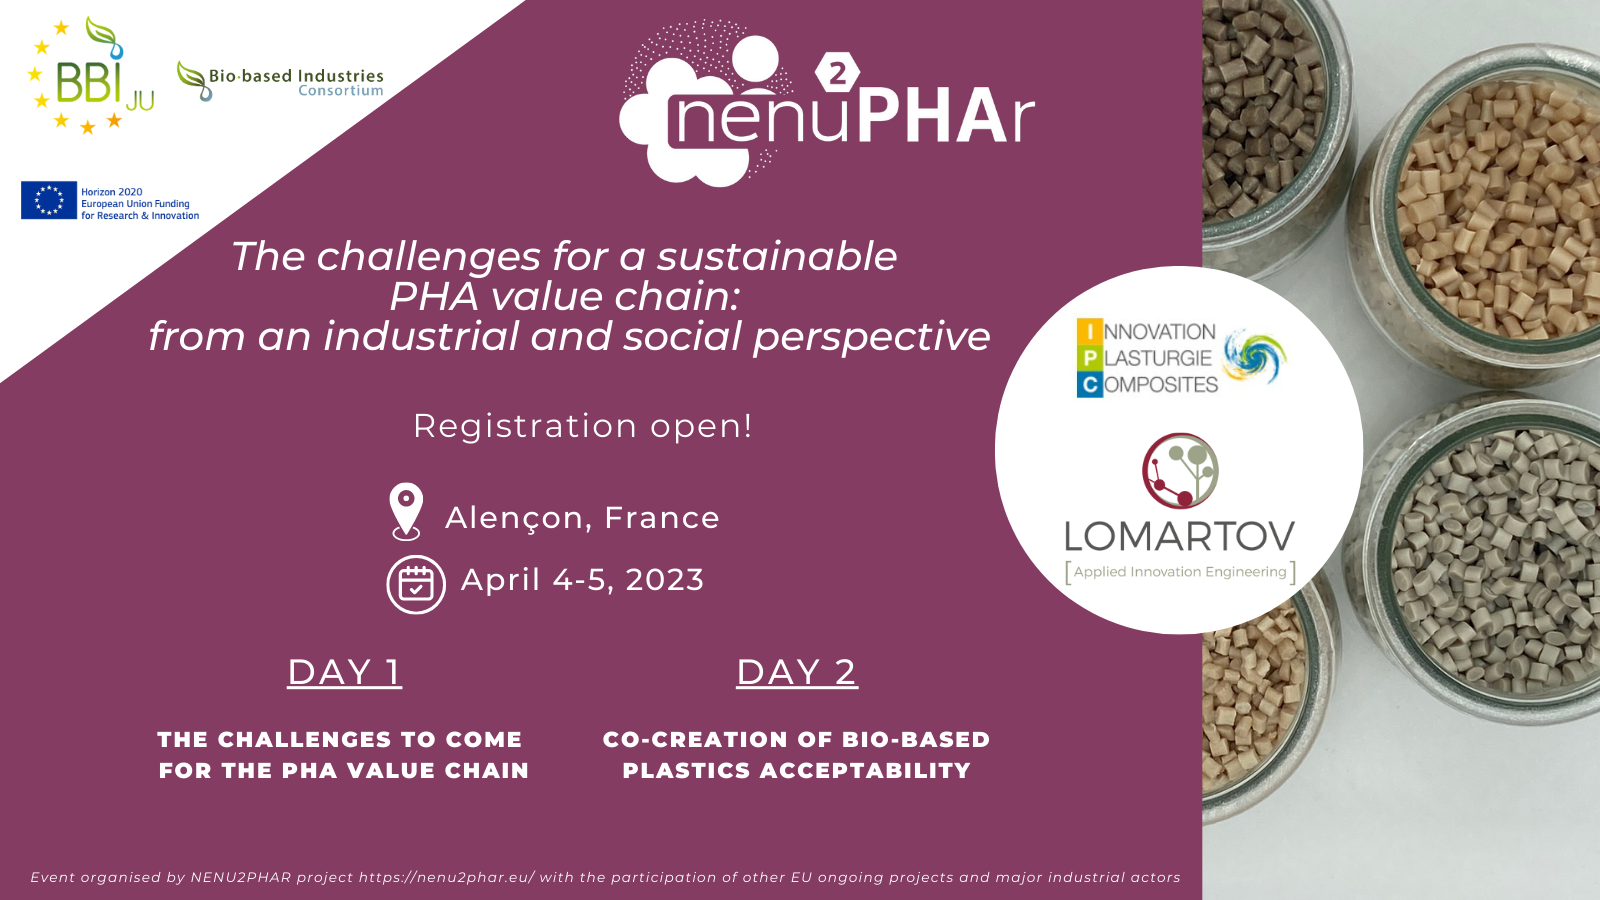 Registration open – The NENU2PHAR project organises its first external event on April 4th and 5th 2023